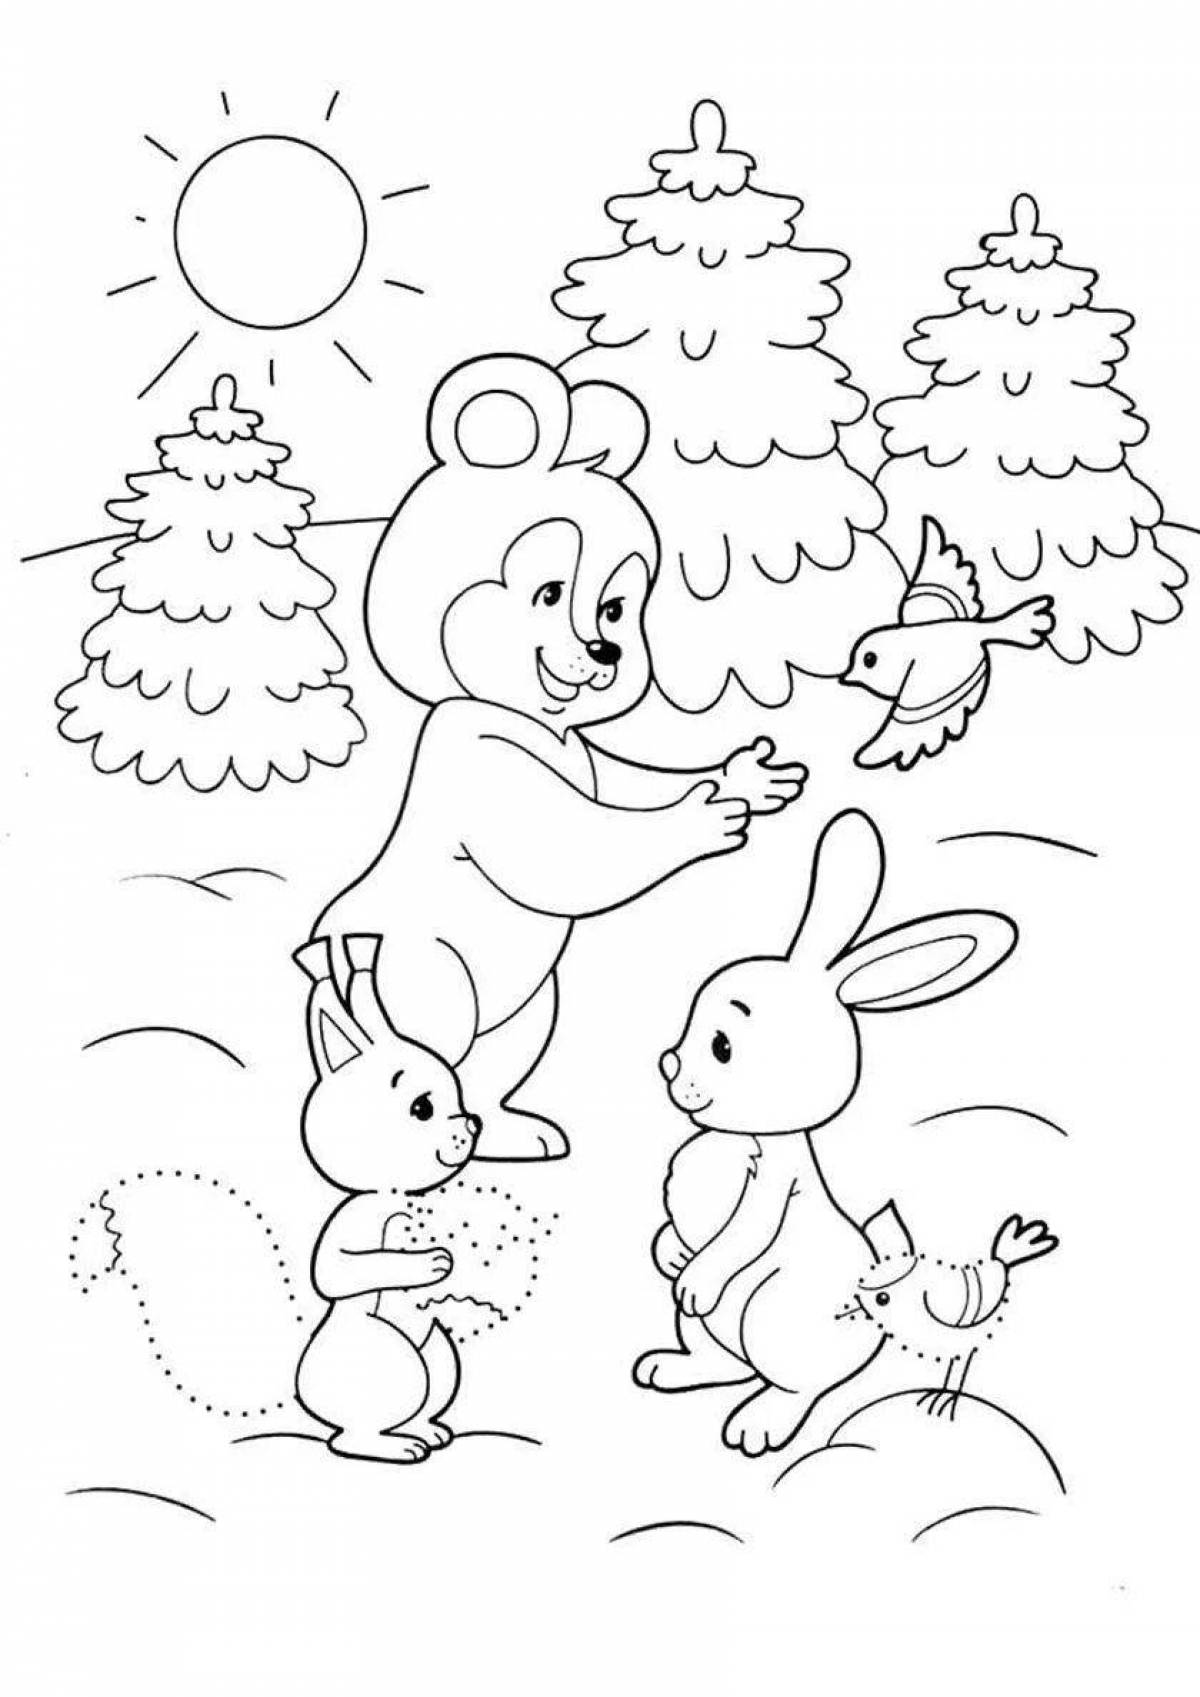 Scenic winter forest with animals coloring book